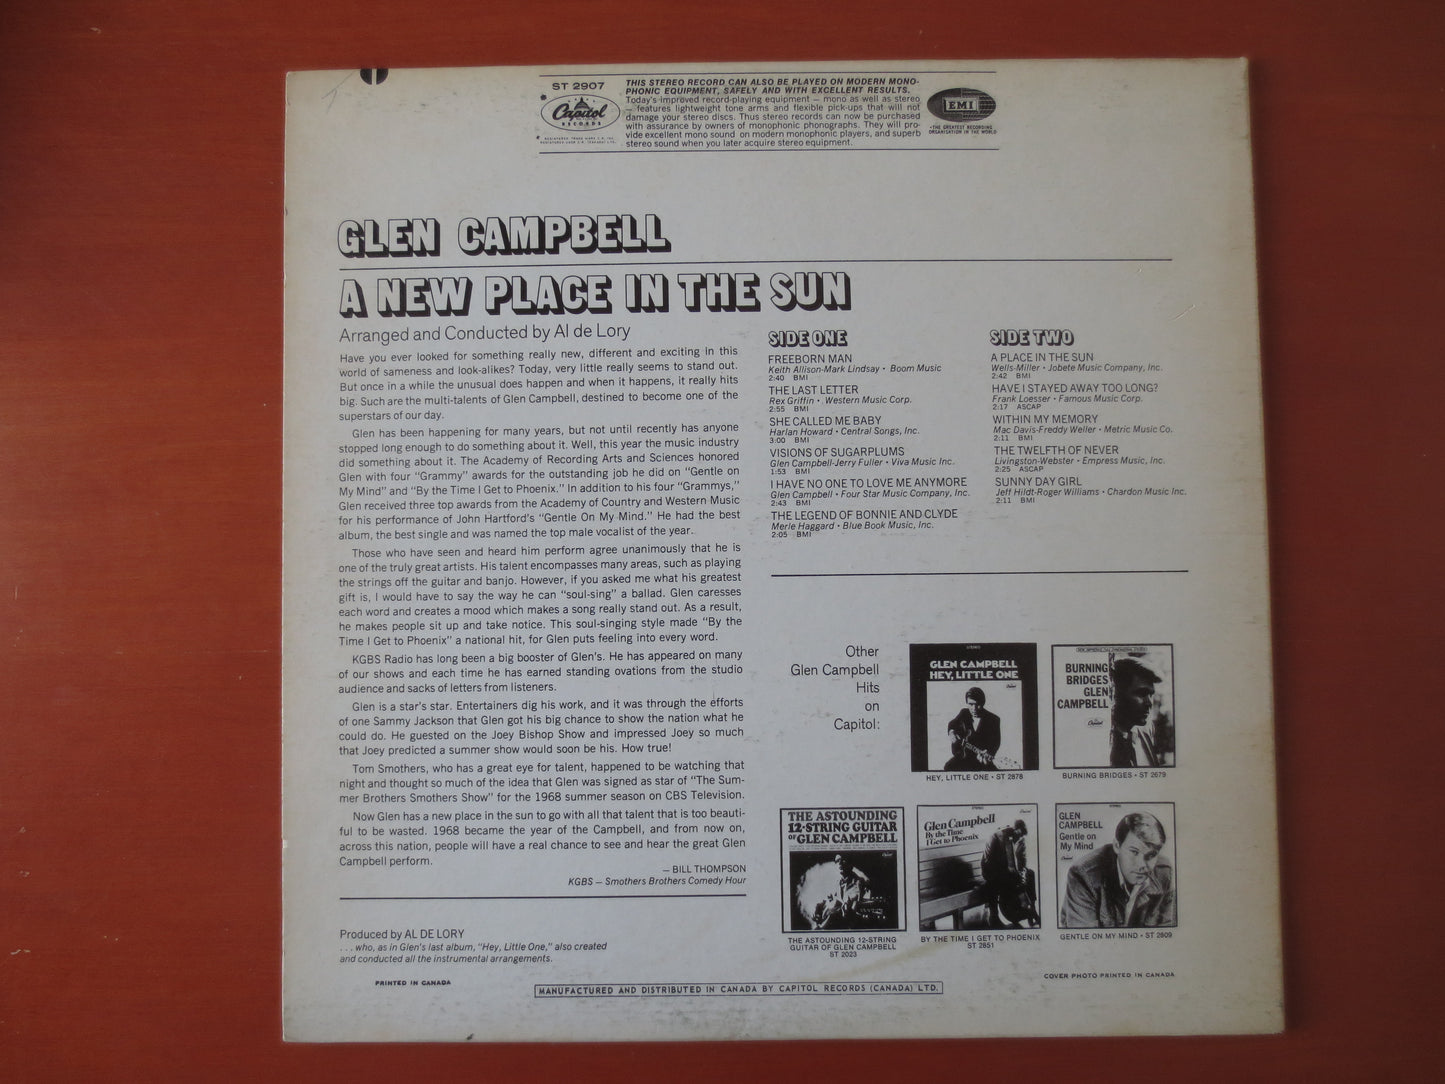 GLEN CAMPBELL Album, A New Place In The SUN, Glen Campbell Vinyl, Glen Campbell Lp, Country Record, Vinyl Lps, 1968 Records